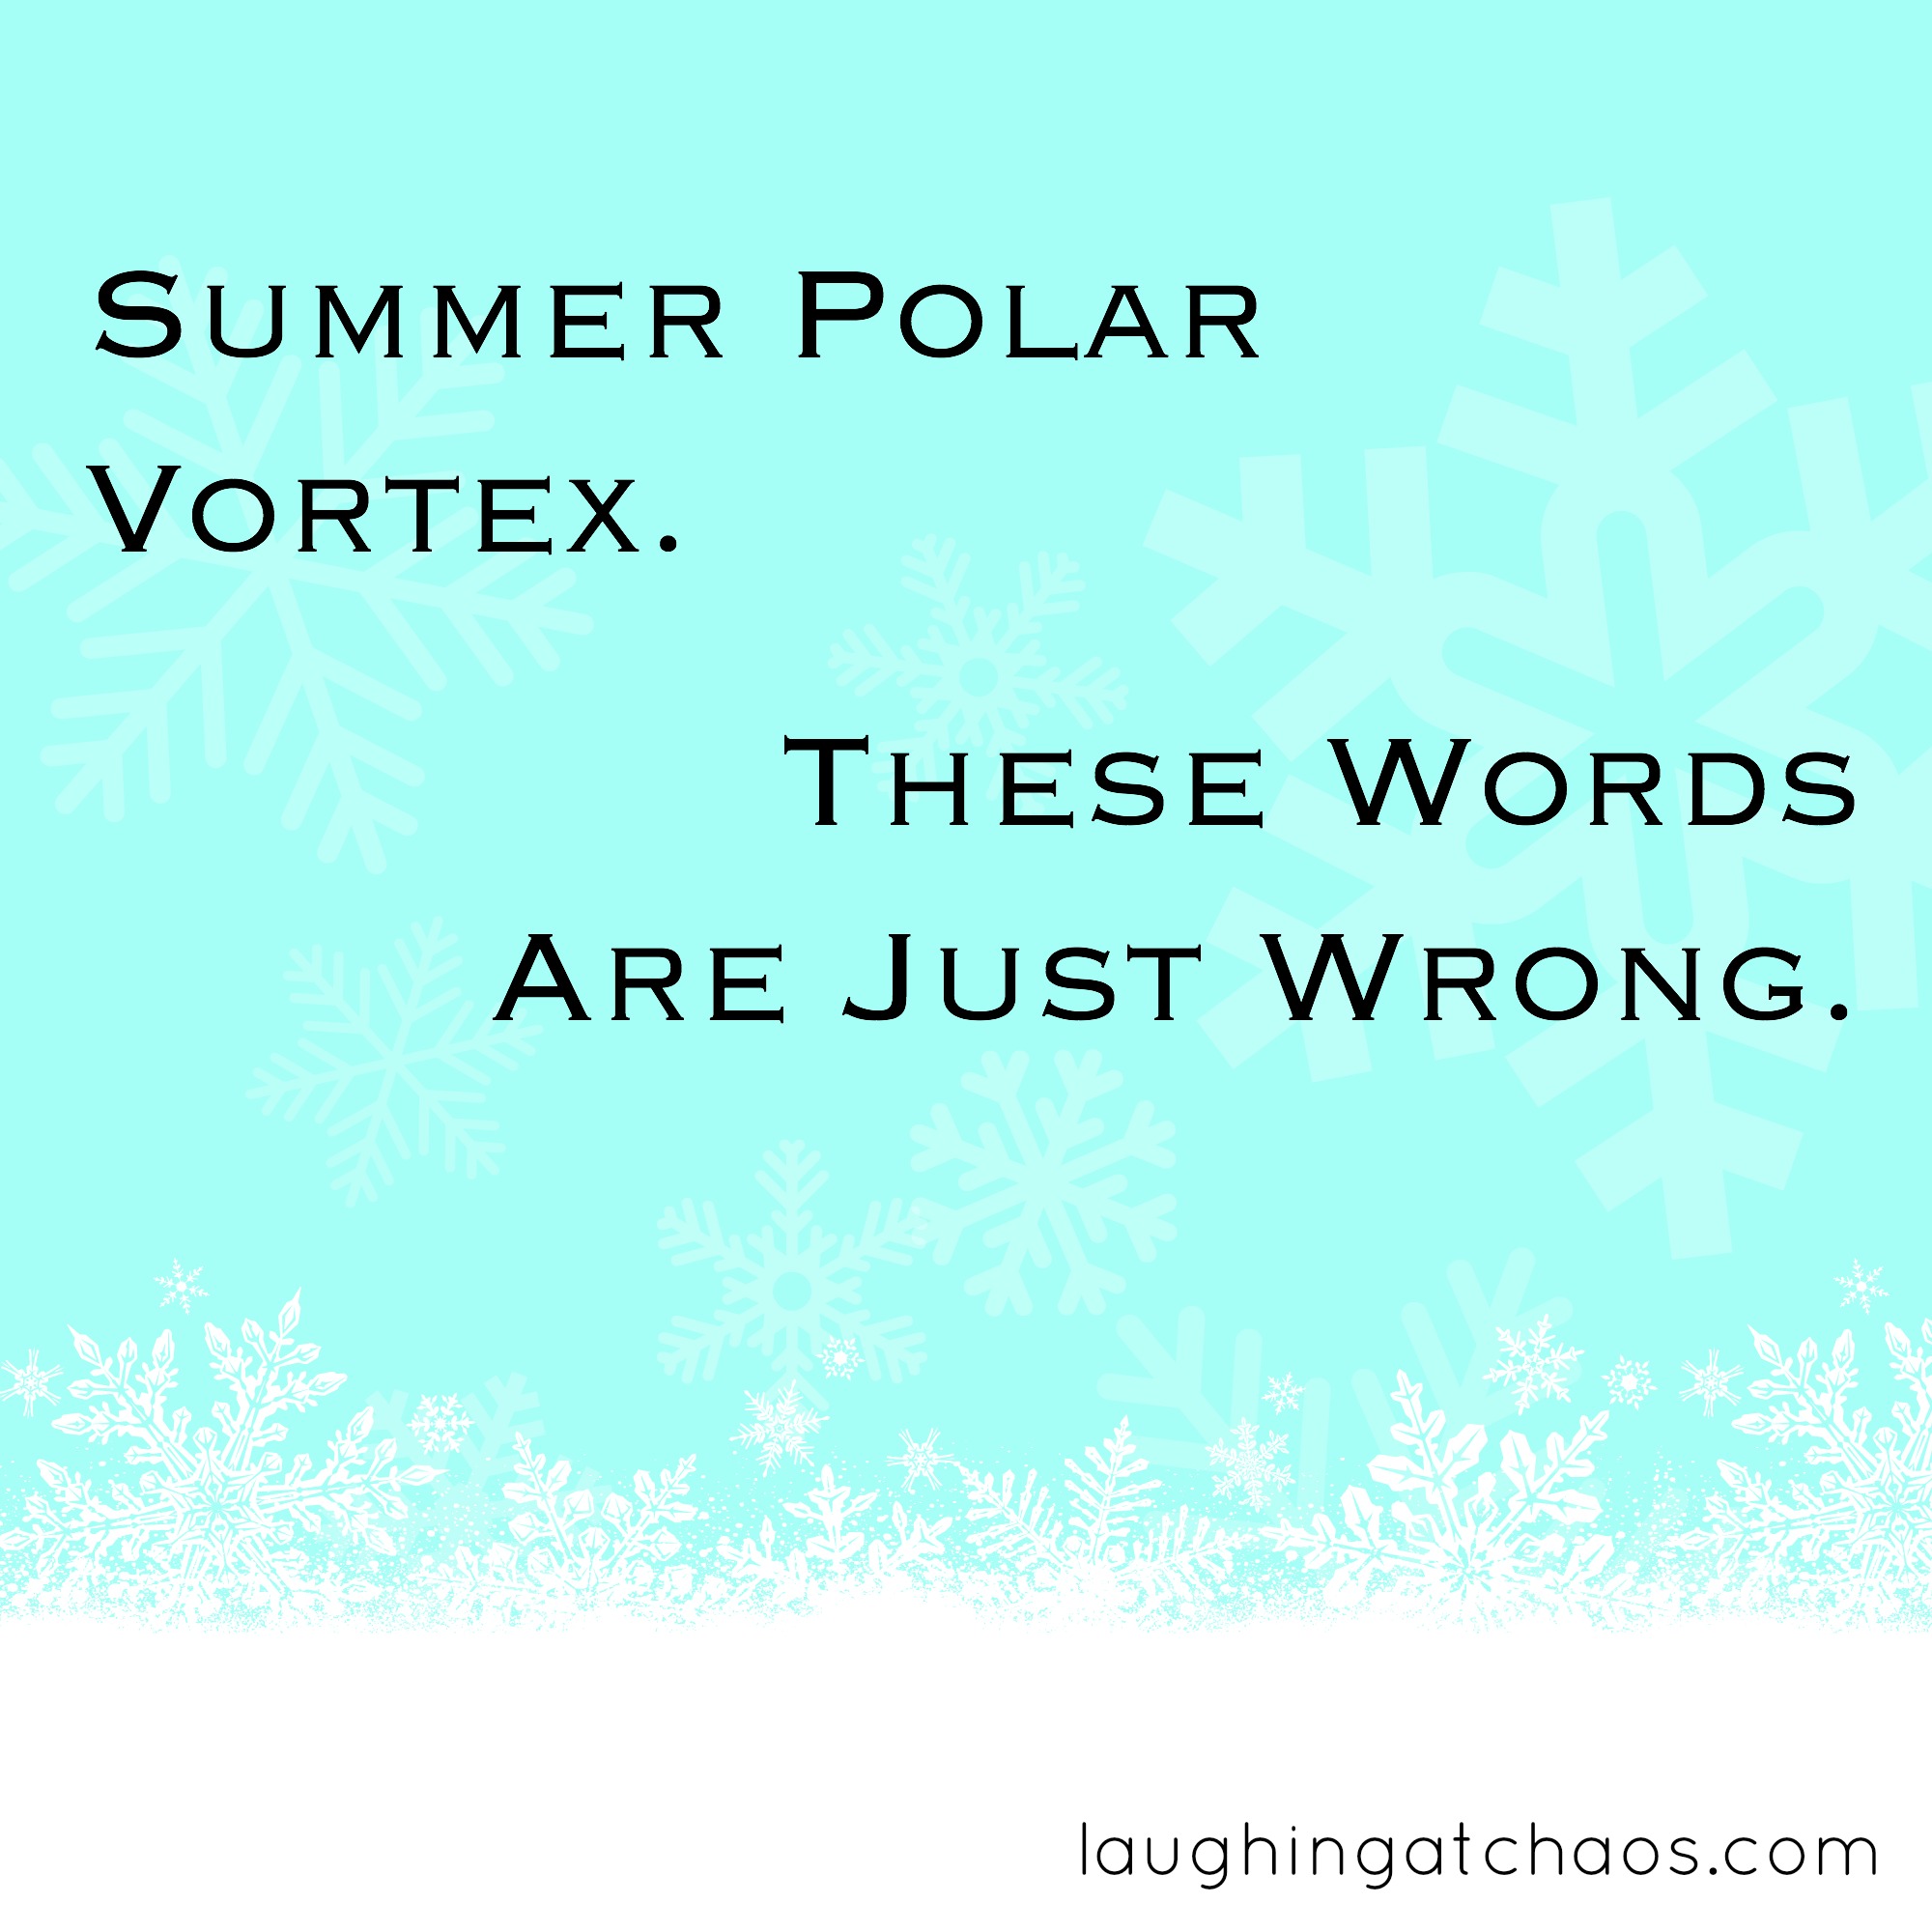 Summer polar vortex. These words are just wrong.